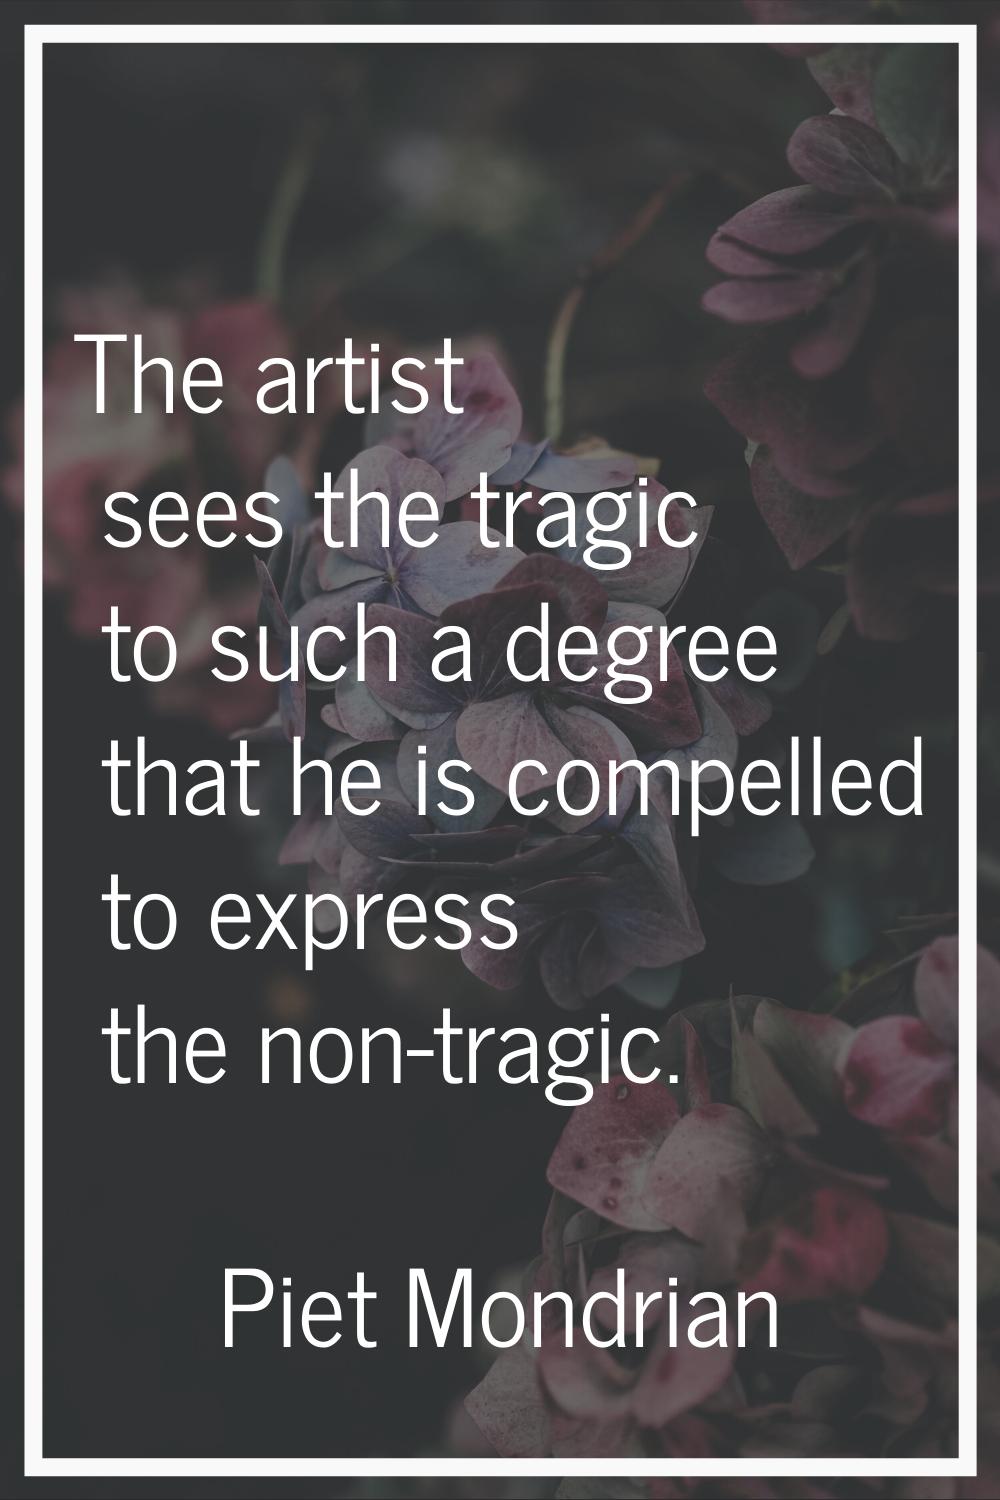 The artist sees the tragic to such a degree that he is compelled to express the non-tragic.